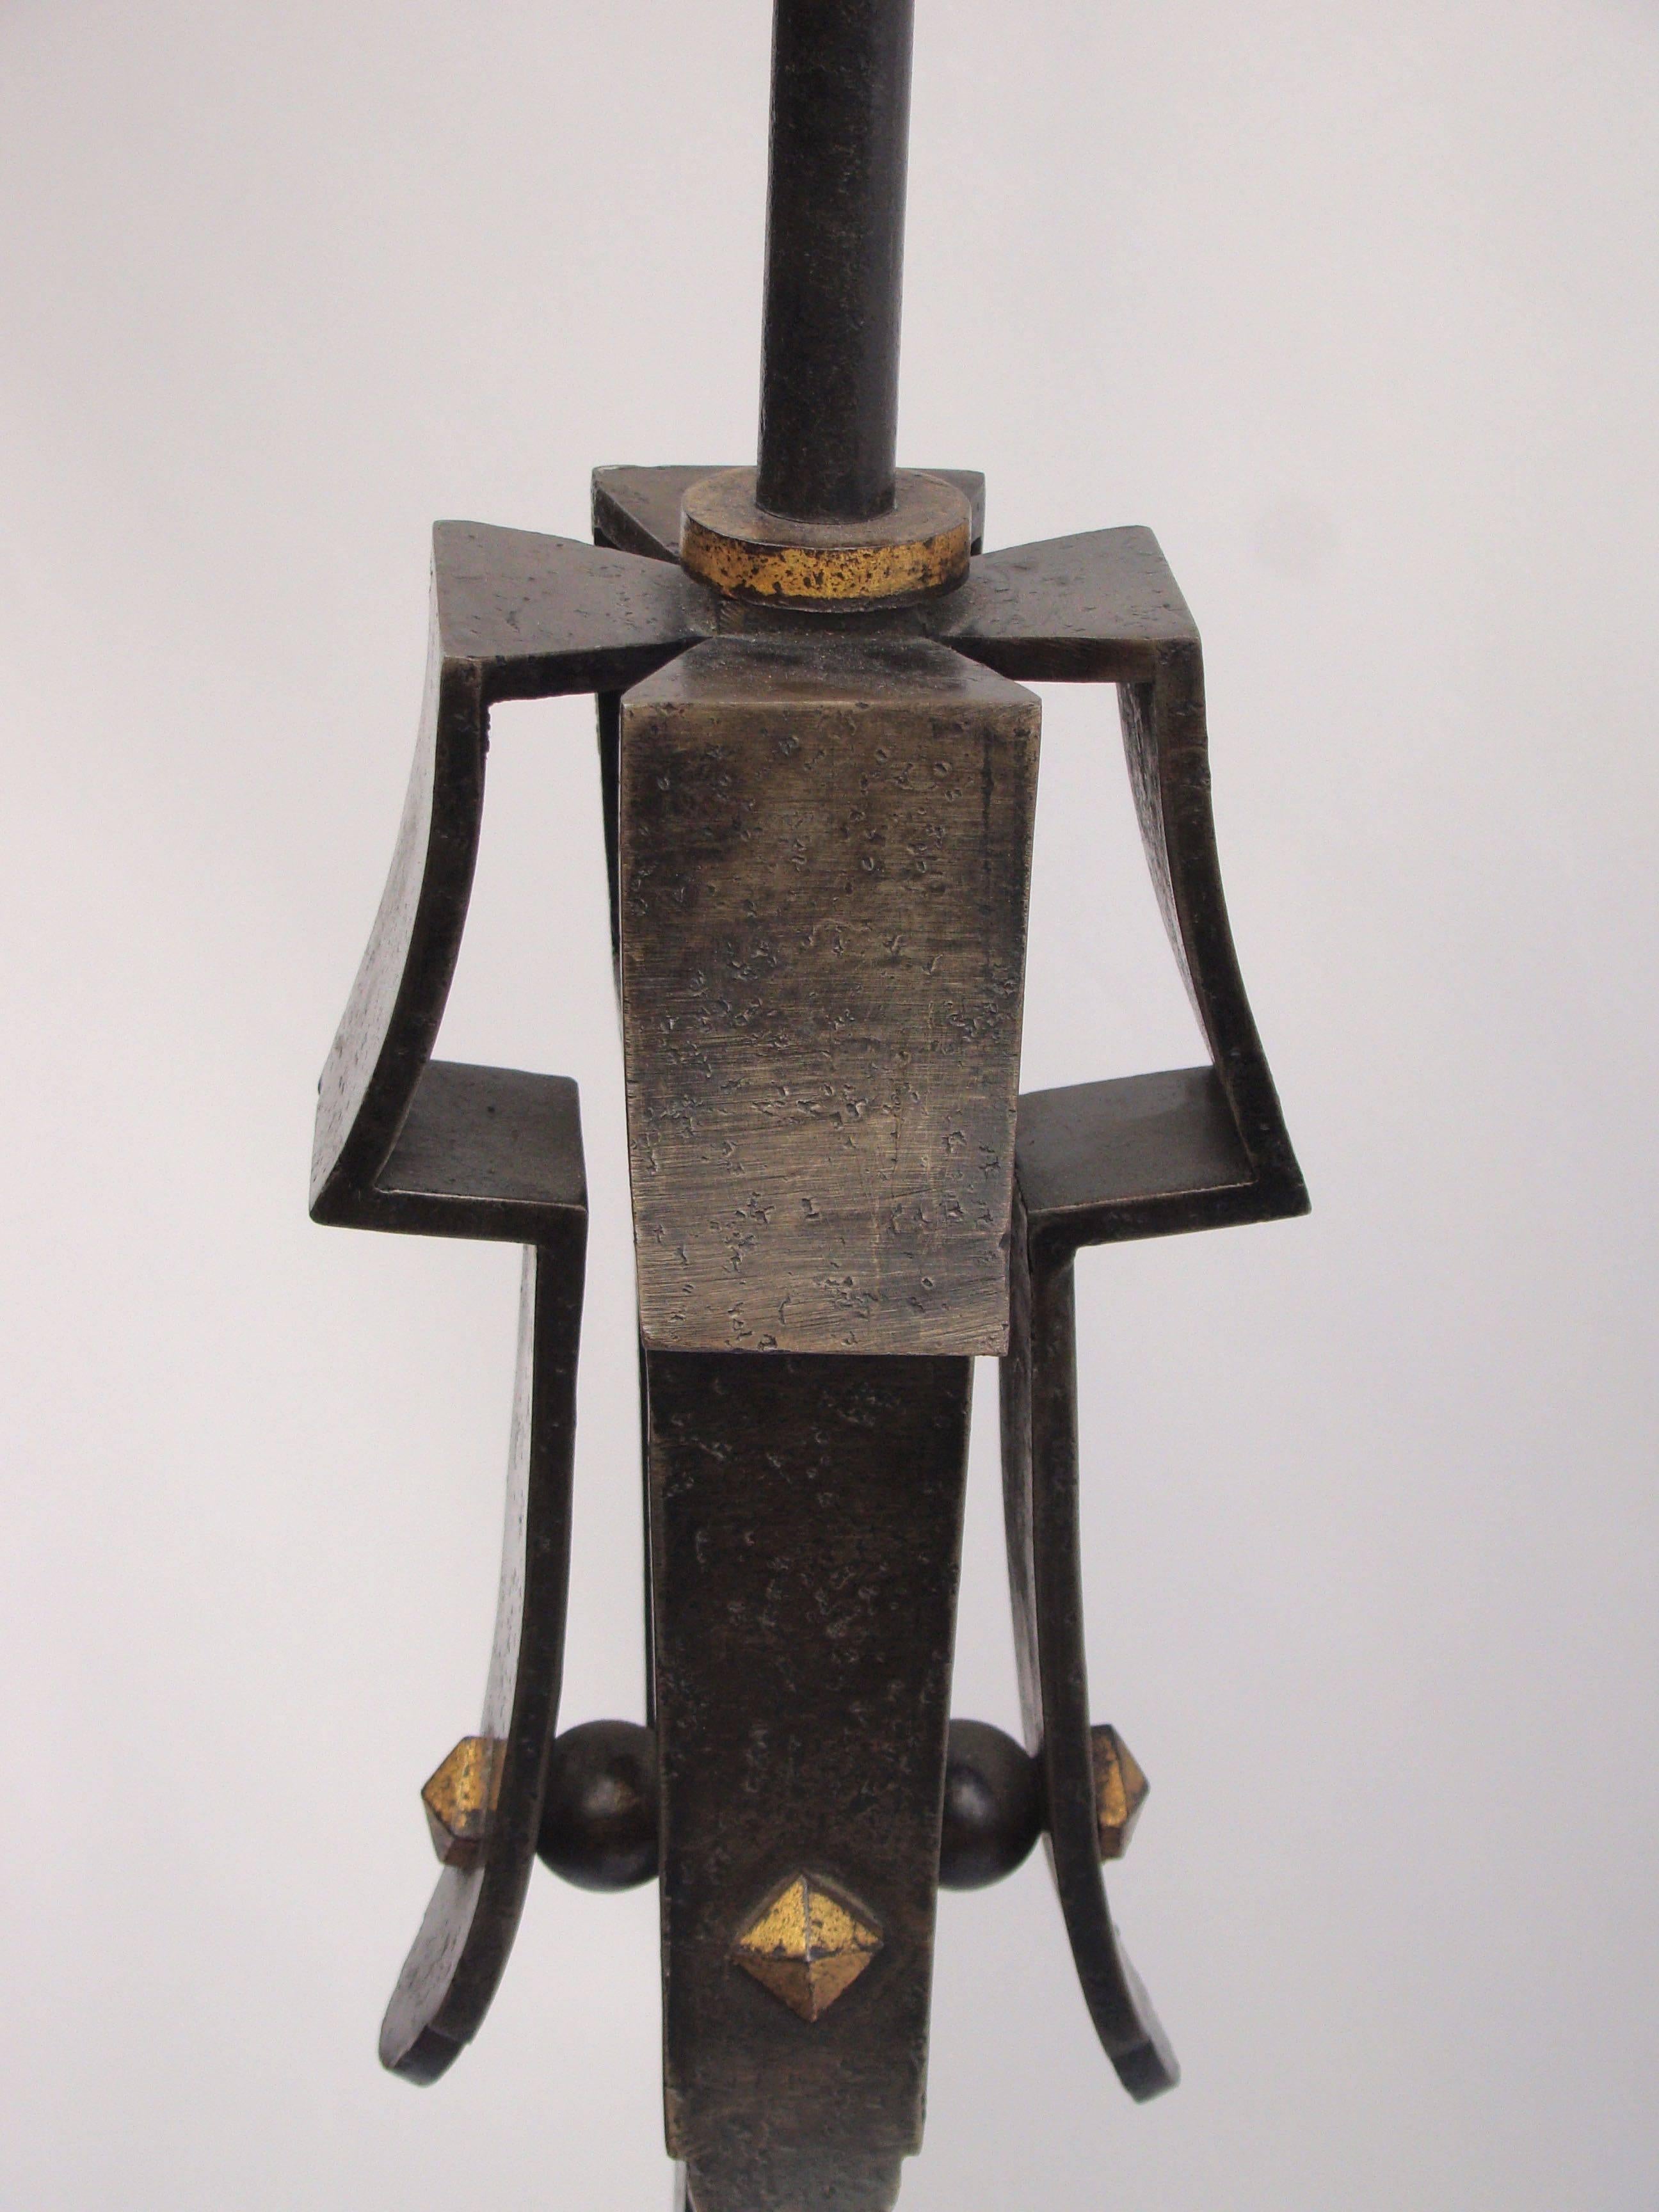 French black burnished wrought iron floor lamp by C.A.F, (Compagnie des Arts Français), Jacques Adnet, circa 1940 with a four legs base, a twisted pattern at mid-height and a nailed pattern in a black and gold wrought iron.